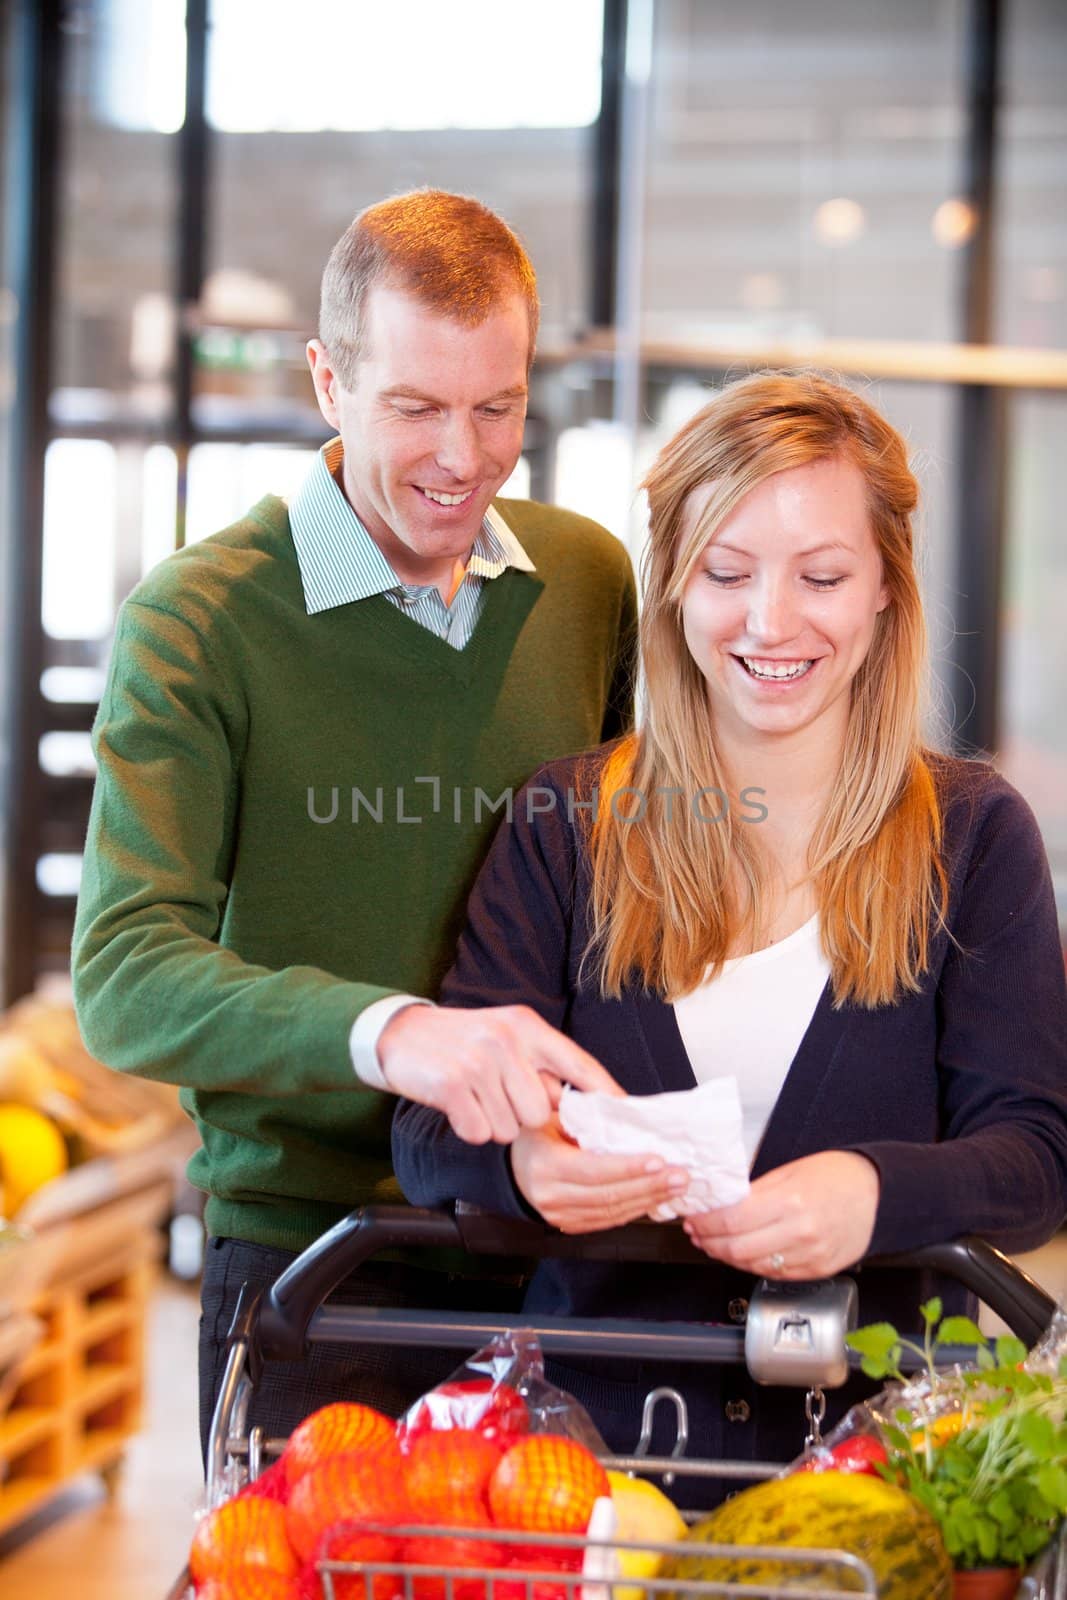 A happy couple looking at a grocery list in a supermarket